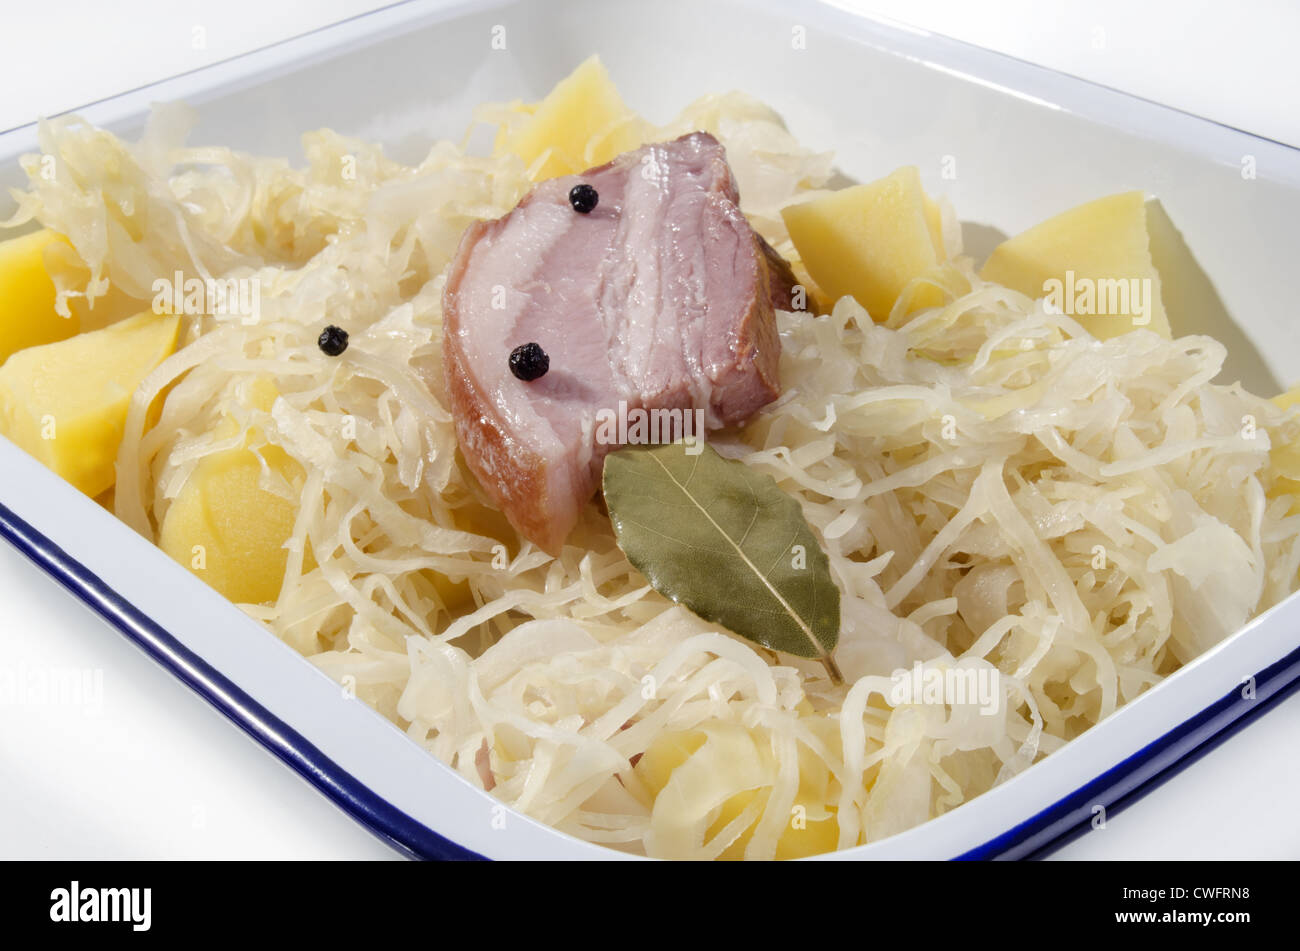 Steamed sauerkraut with pork boiled potatoes and bay leaf Stock Photo